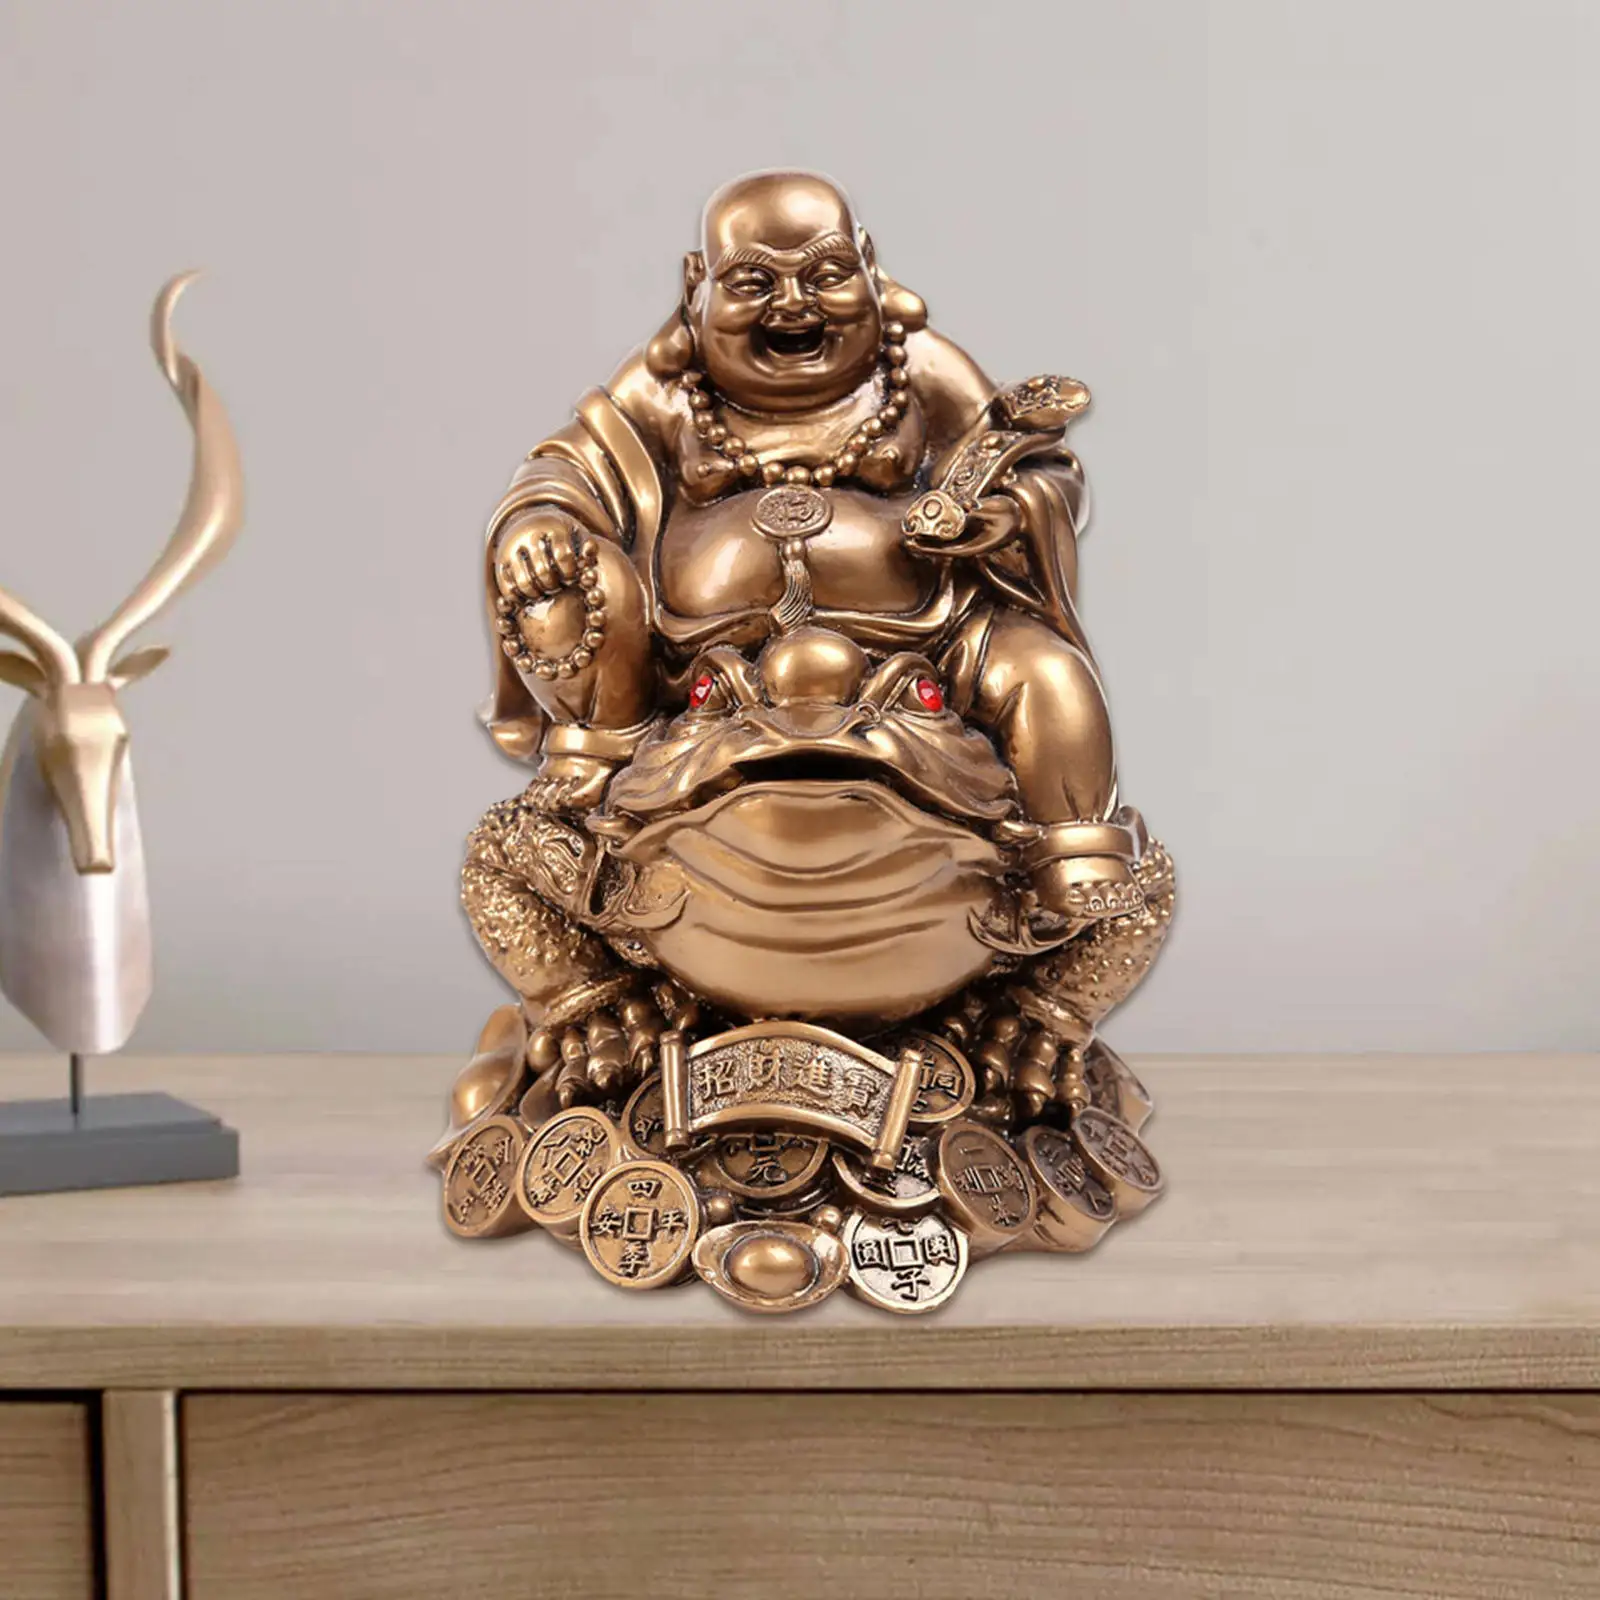 Laughing Buddha Chinese Golden Frog Toad for Feng Shui Ornament Home Marriage Anniversary Housewarming Birthday